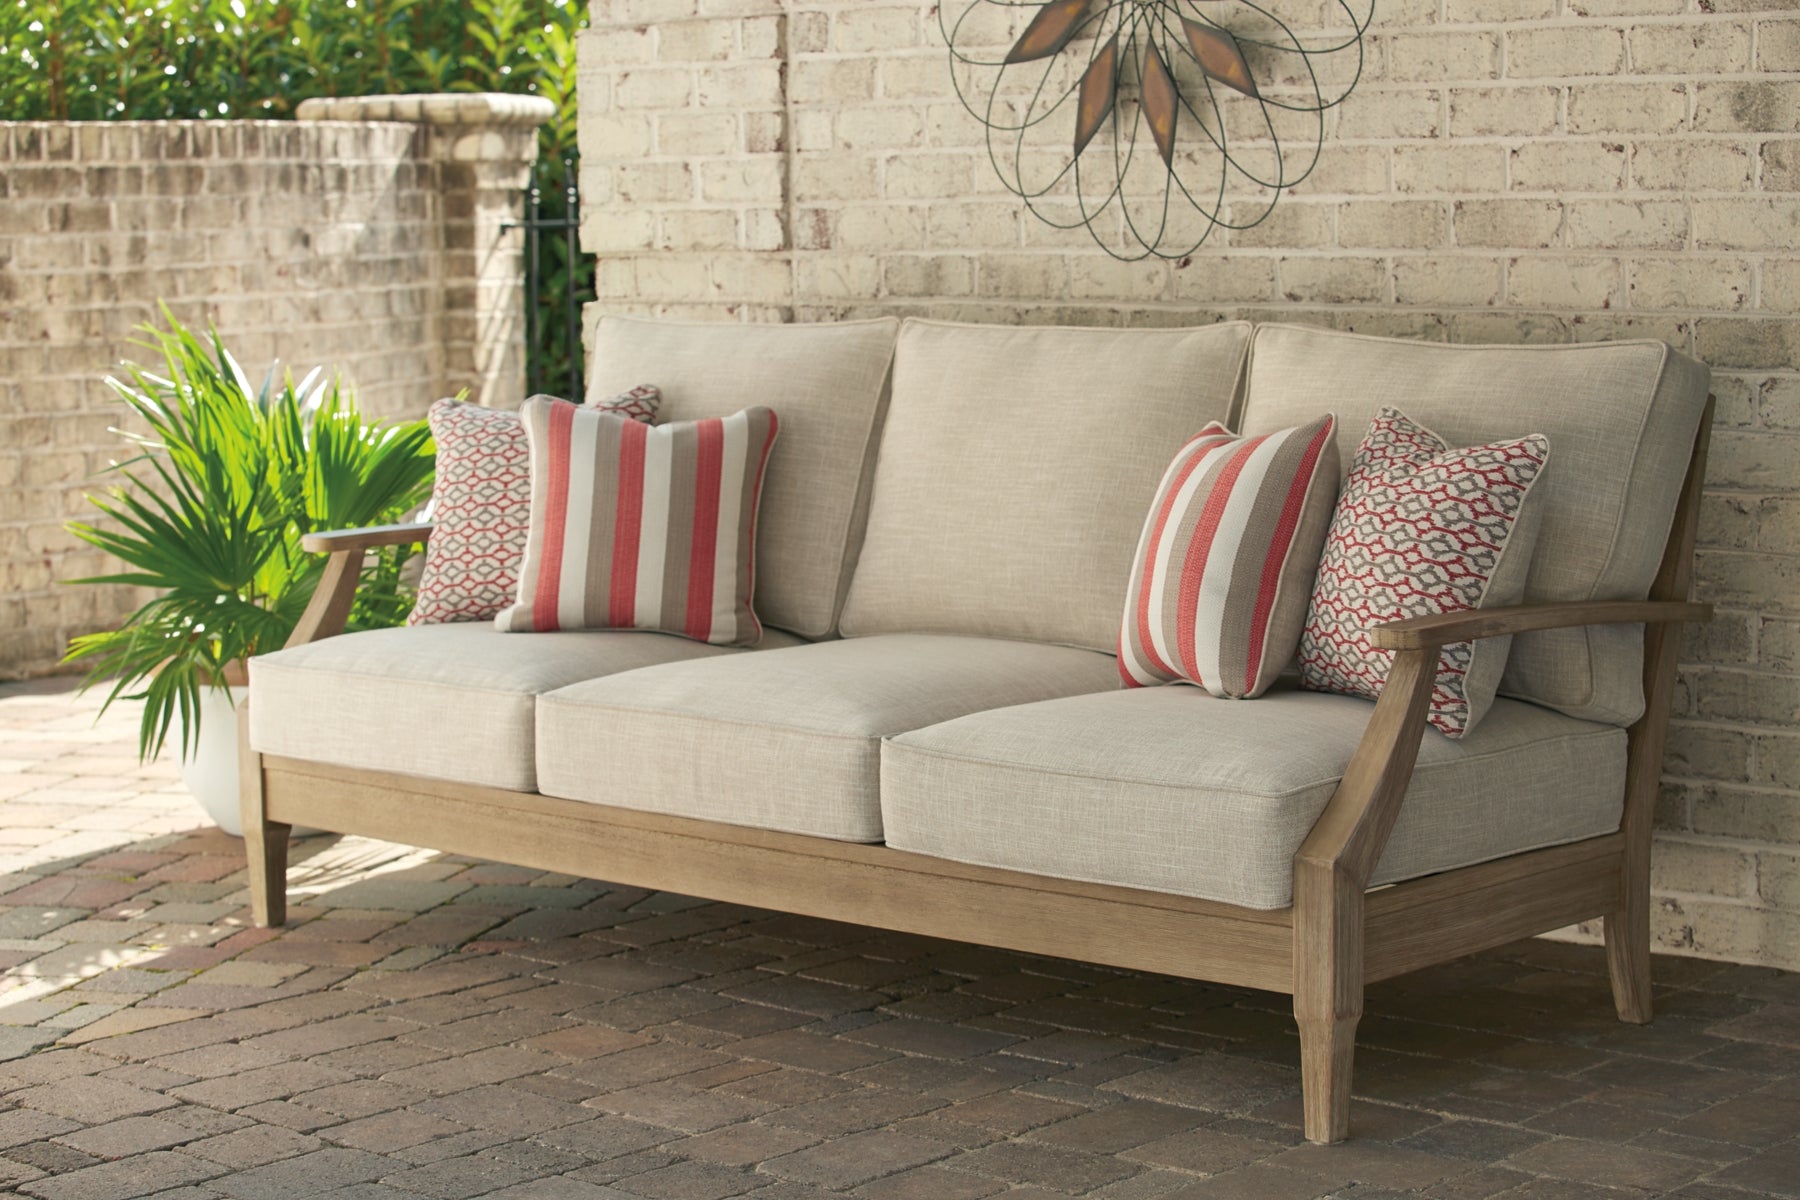 Clare View Outdoor Sofa, Loveseat and Chair